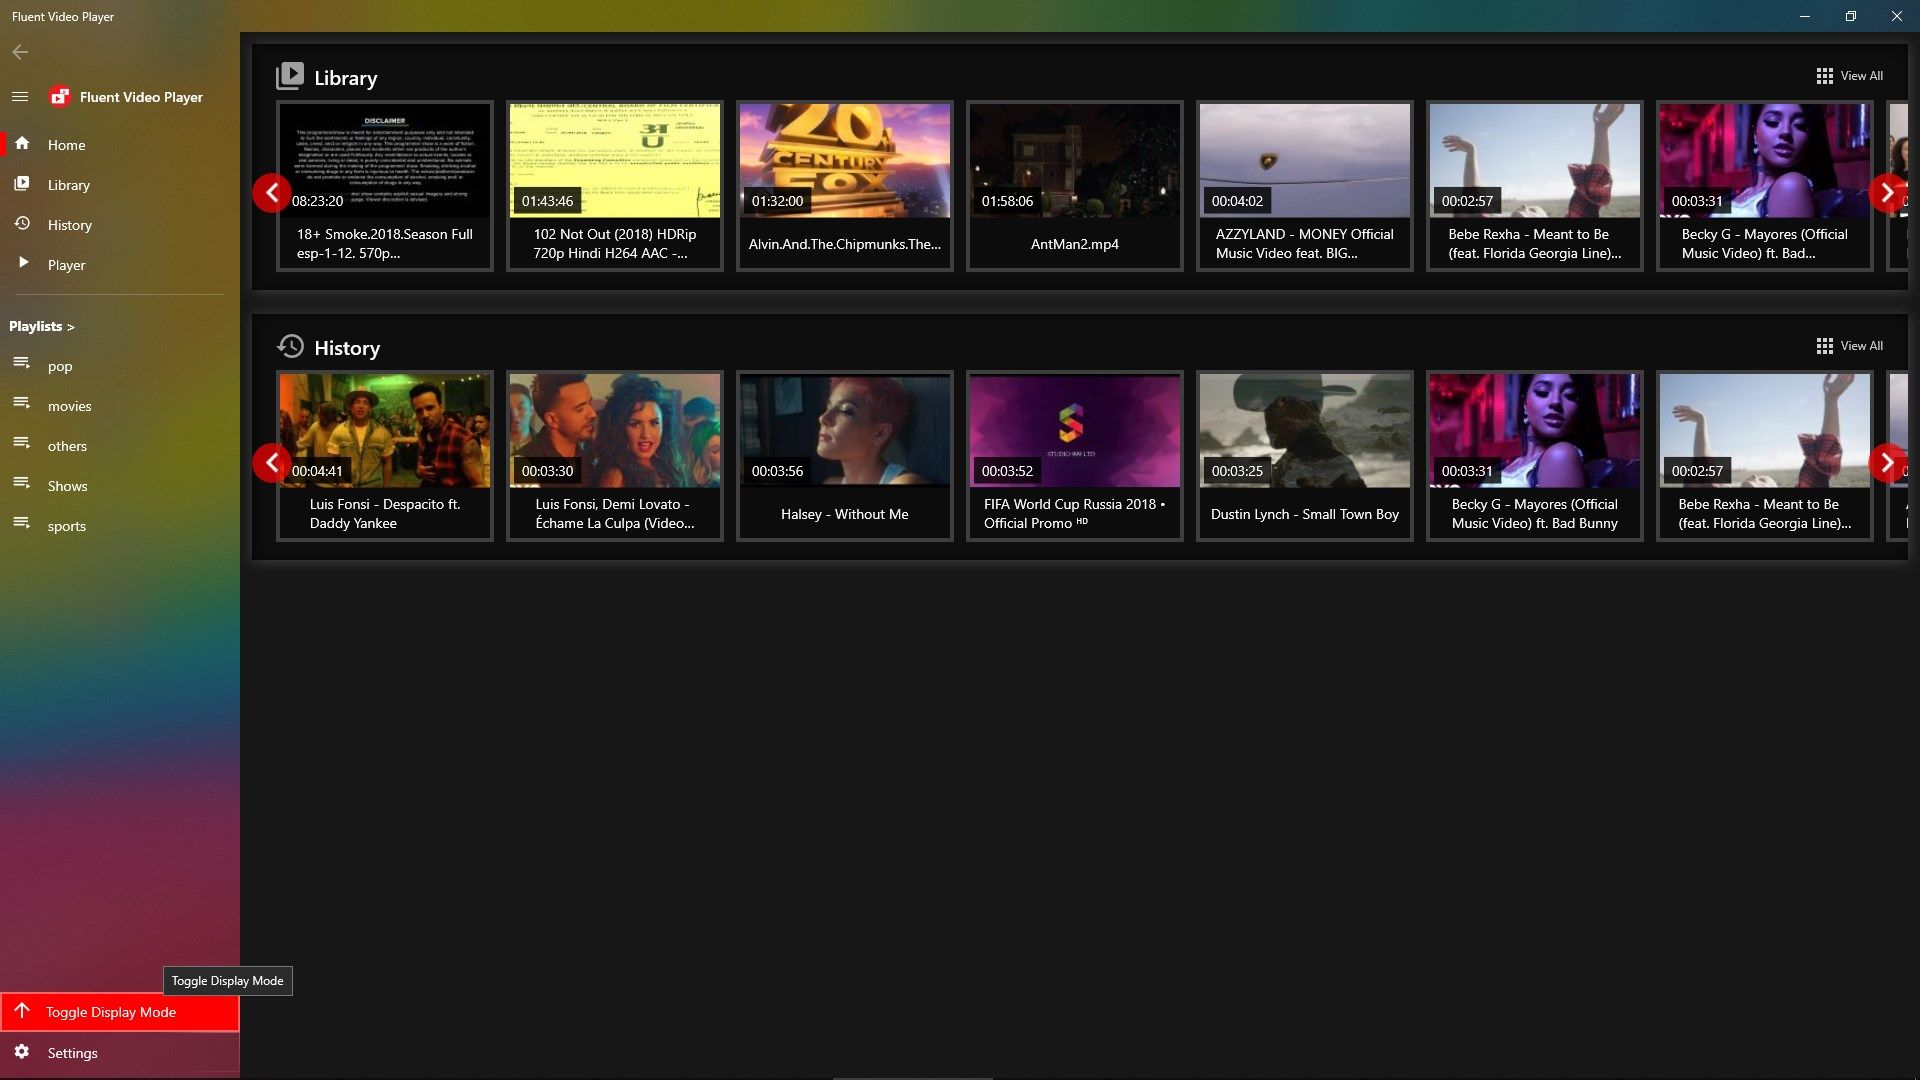 Home Page showing Video Library and History.